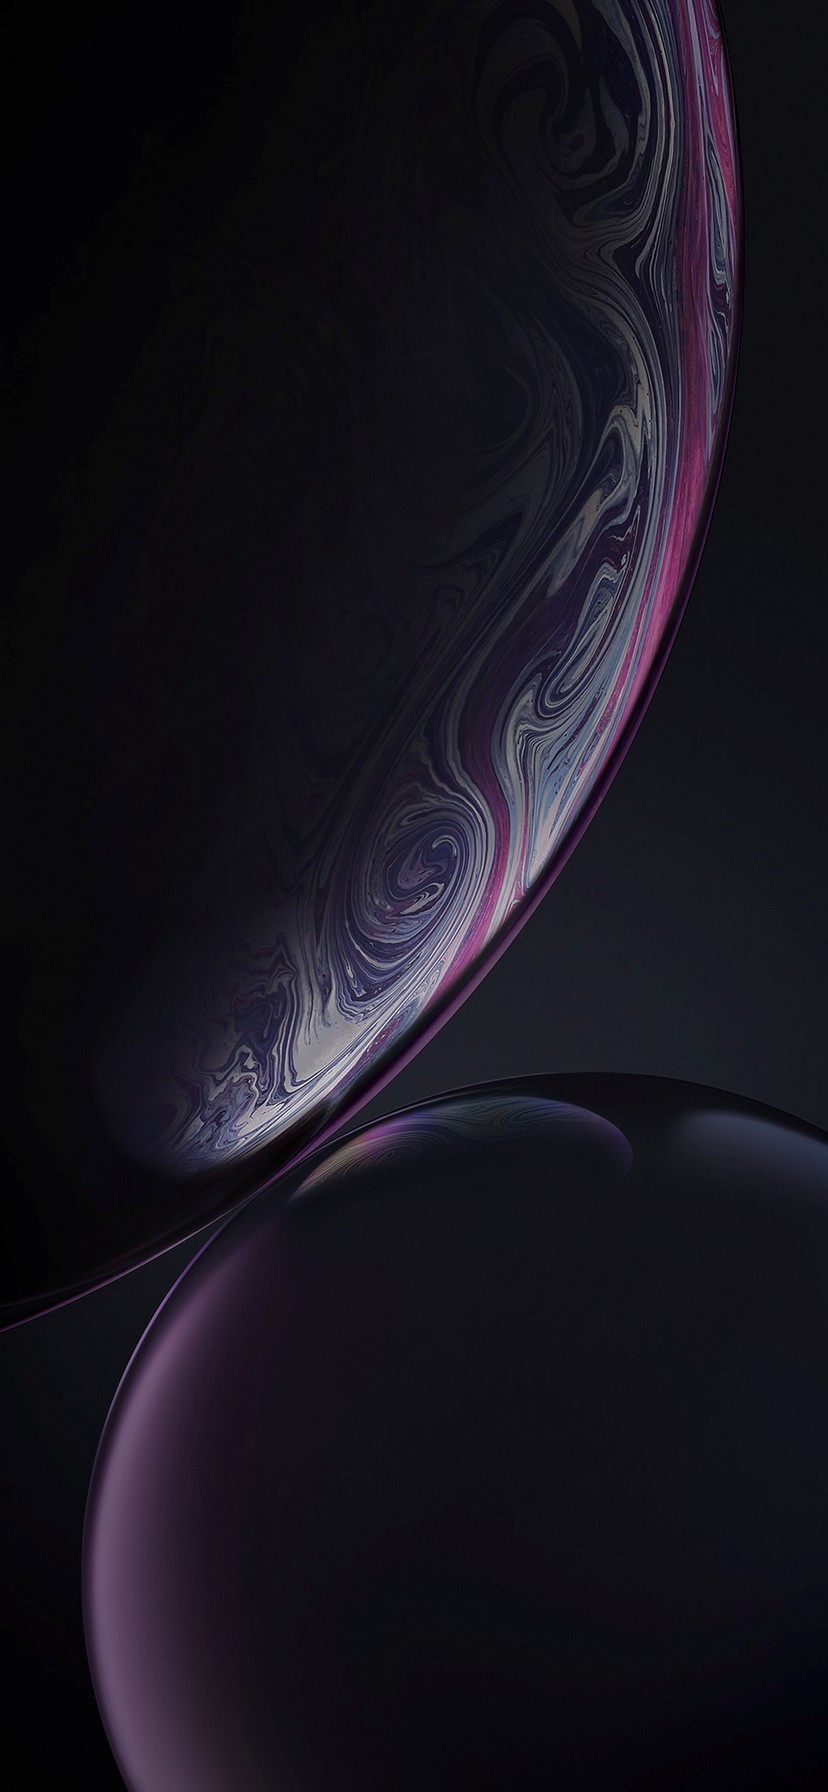 Iphone Xr Wallpaper Lock Screen With High-resolution - Iphone Wallpaper - HD Wallpaper 